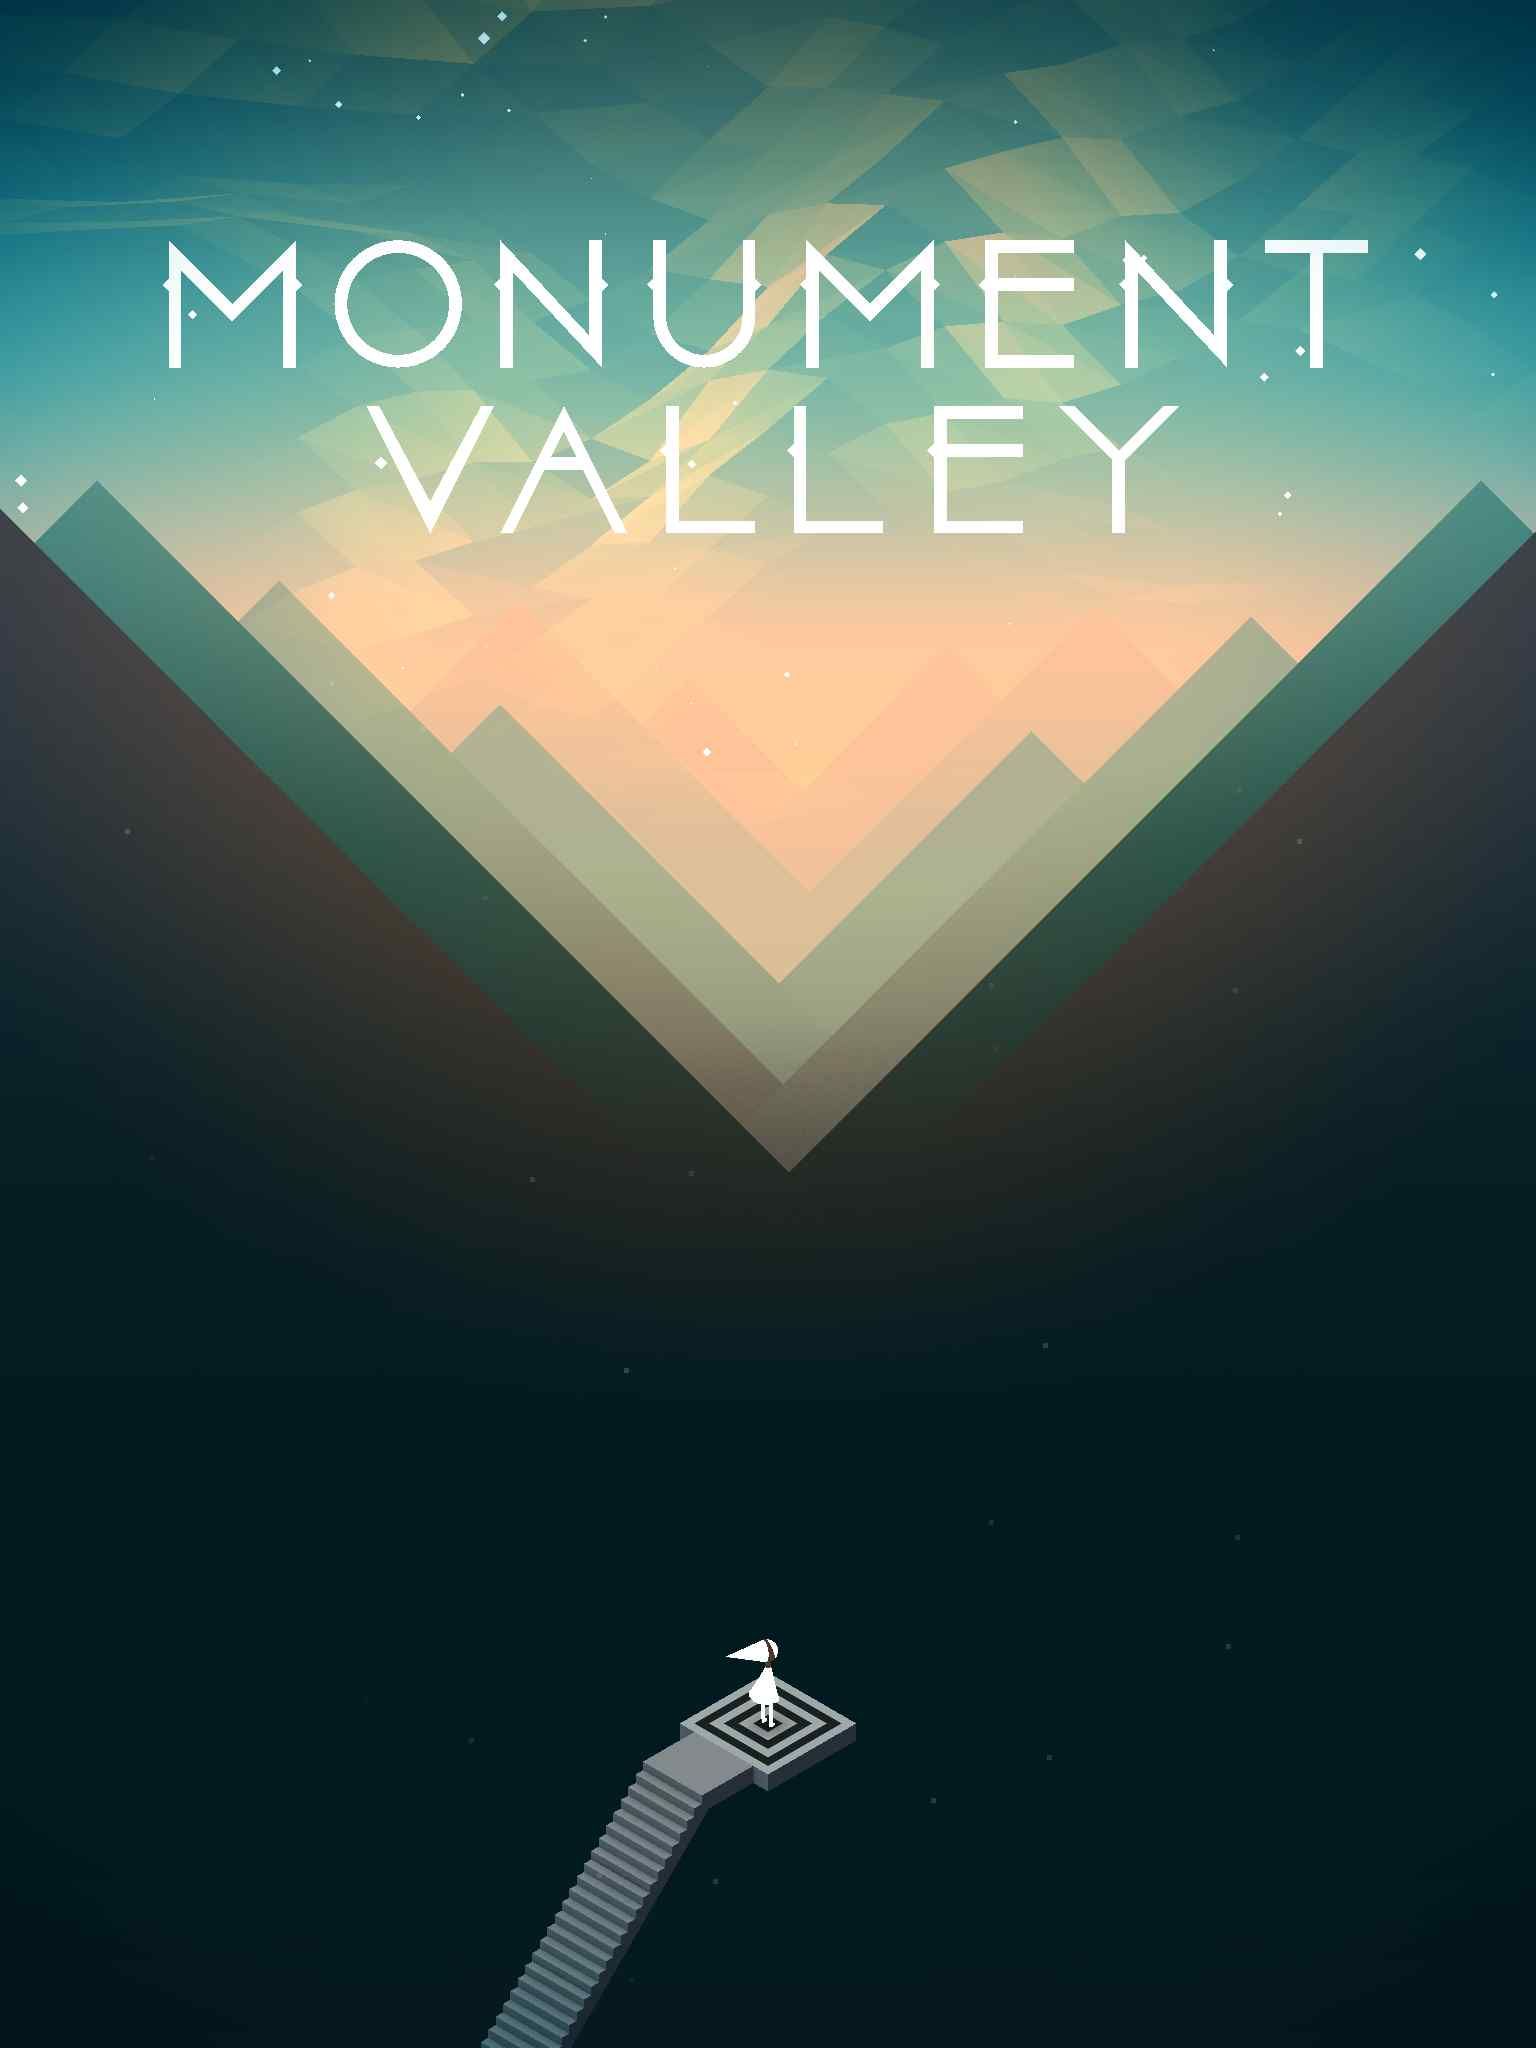 Monument Valley (title)